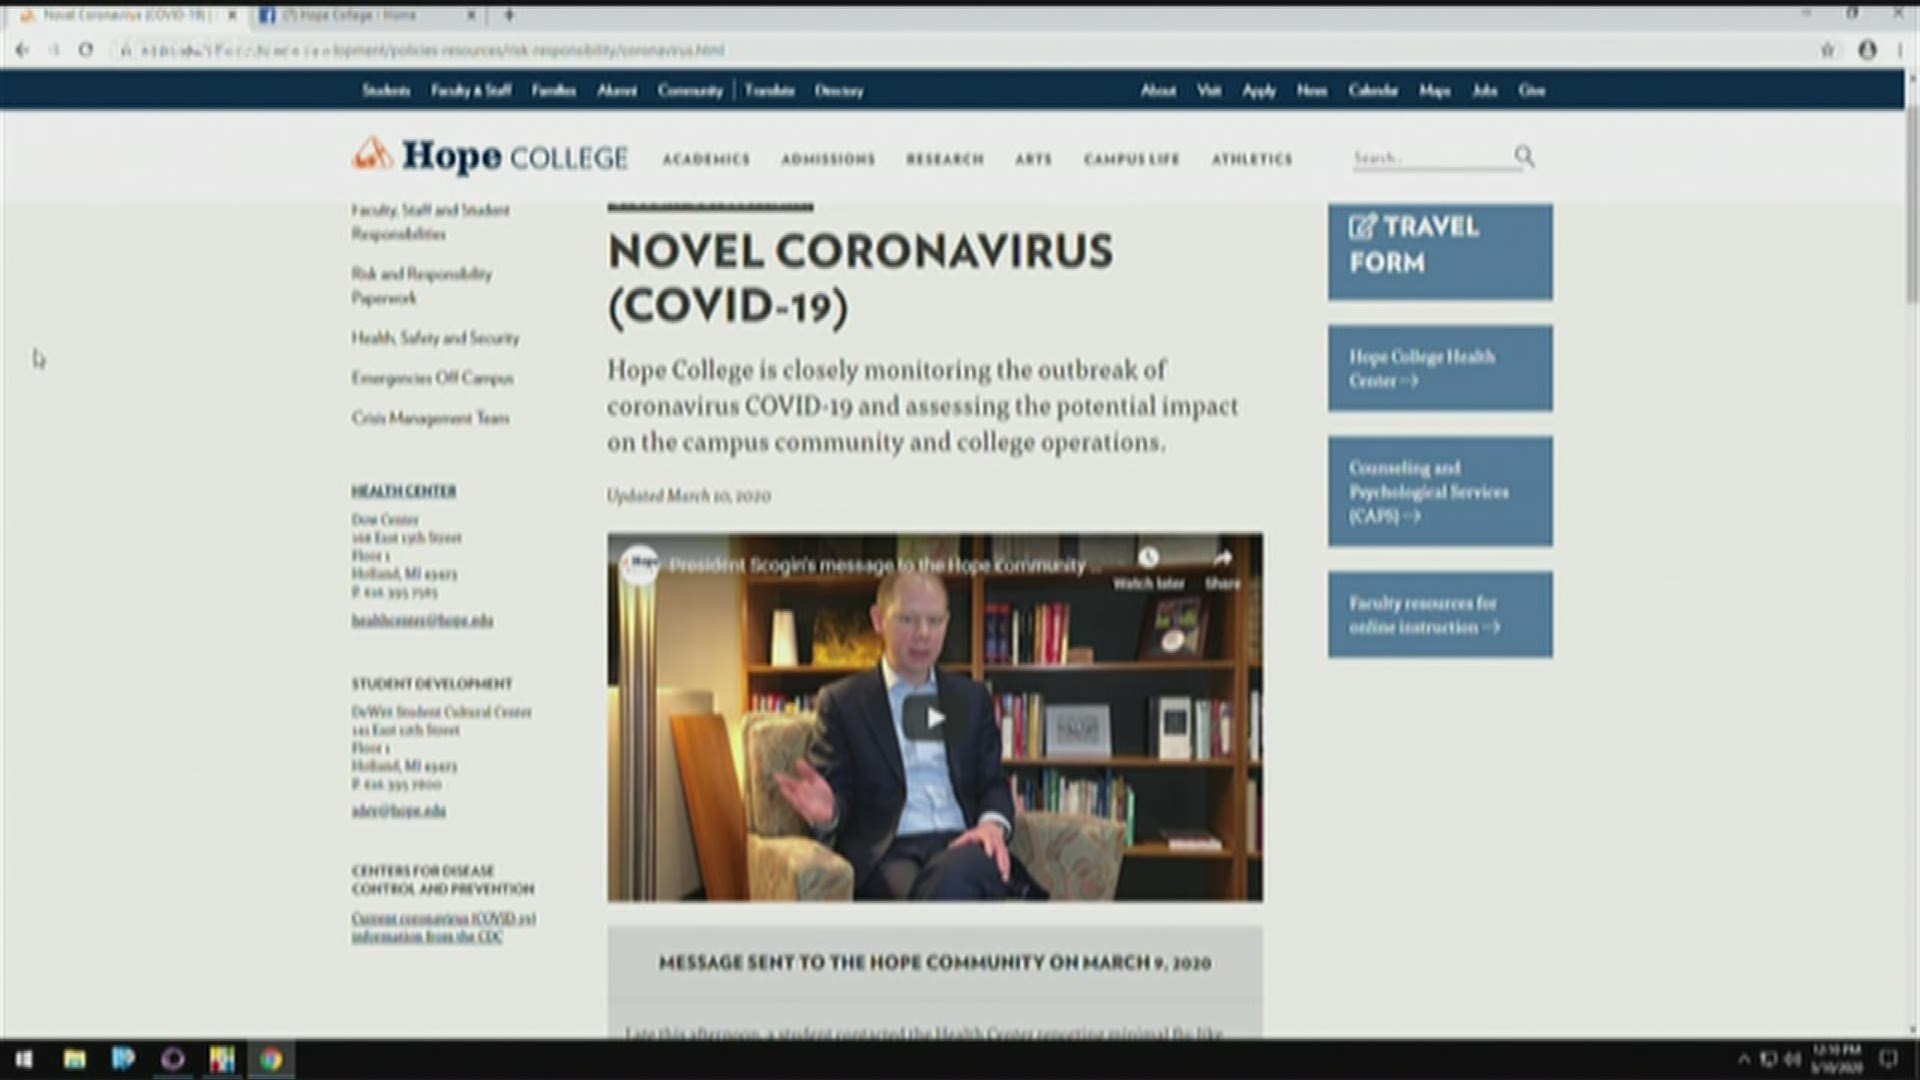 The college said the student has not been diagnosed with COVID-19, but is being monitored for symptoms.